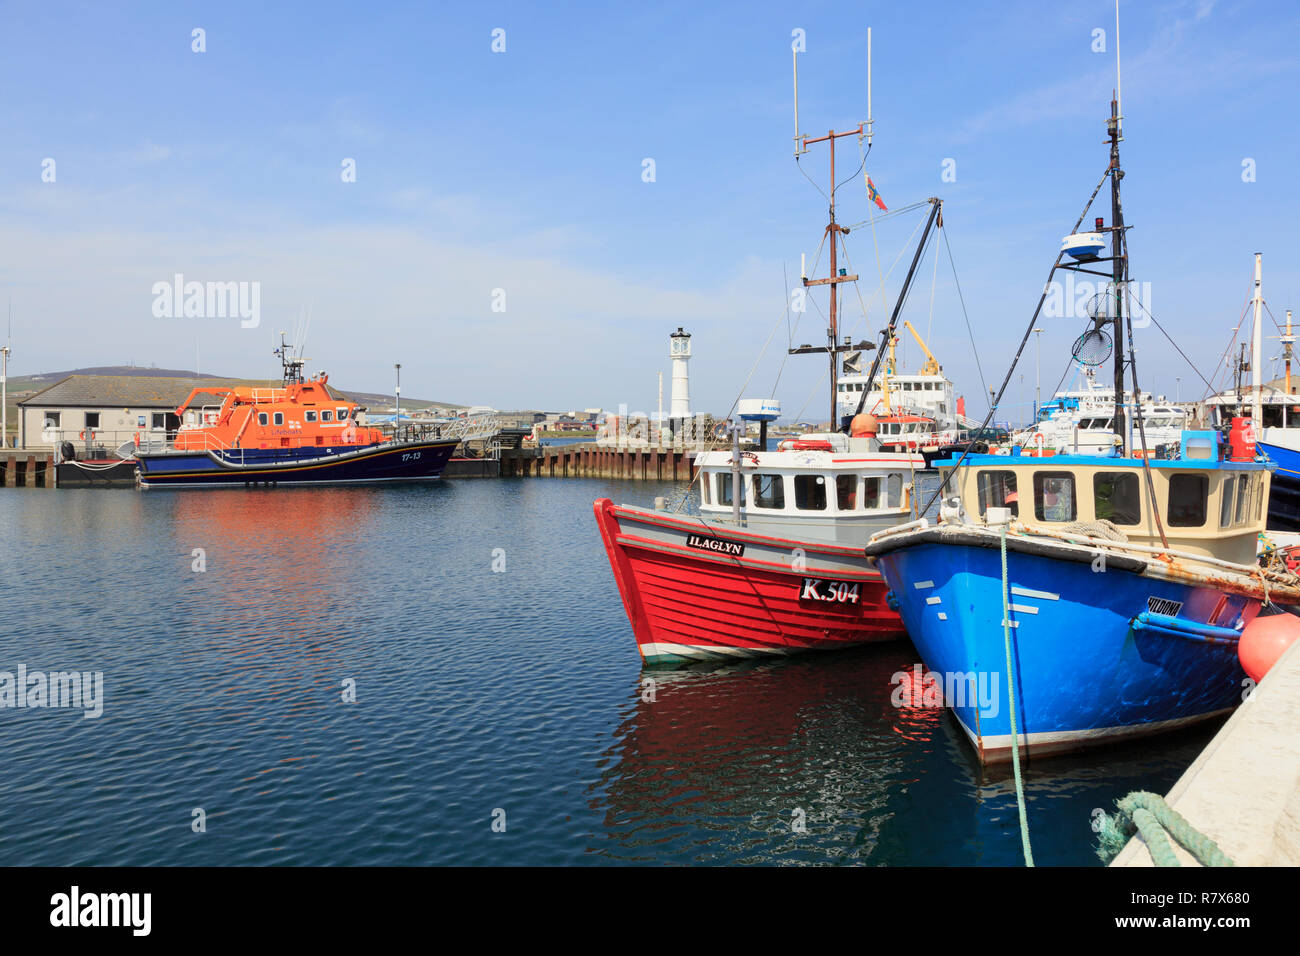 Fishing boats moored in the inner harbour with a lifeboat beyond. Kirkwall, Orkney Mainland, Scotland, UK, Great Britain Stock Photo